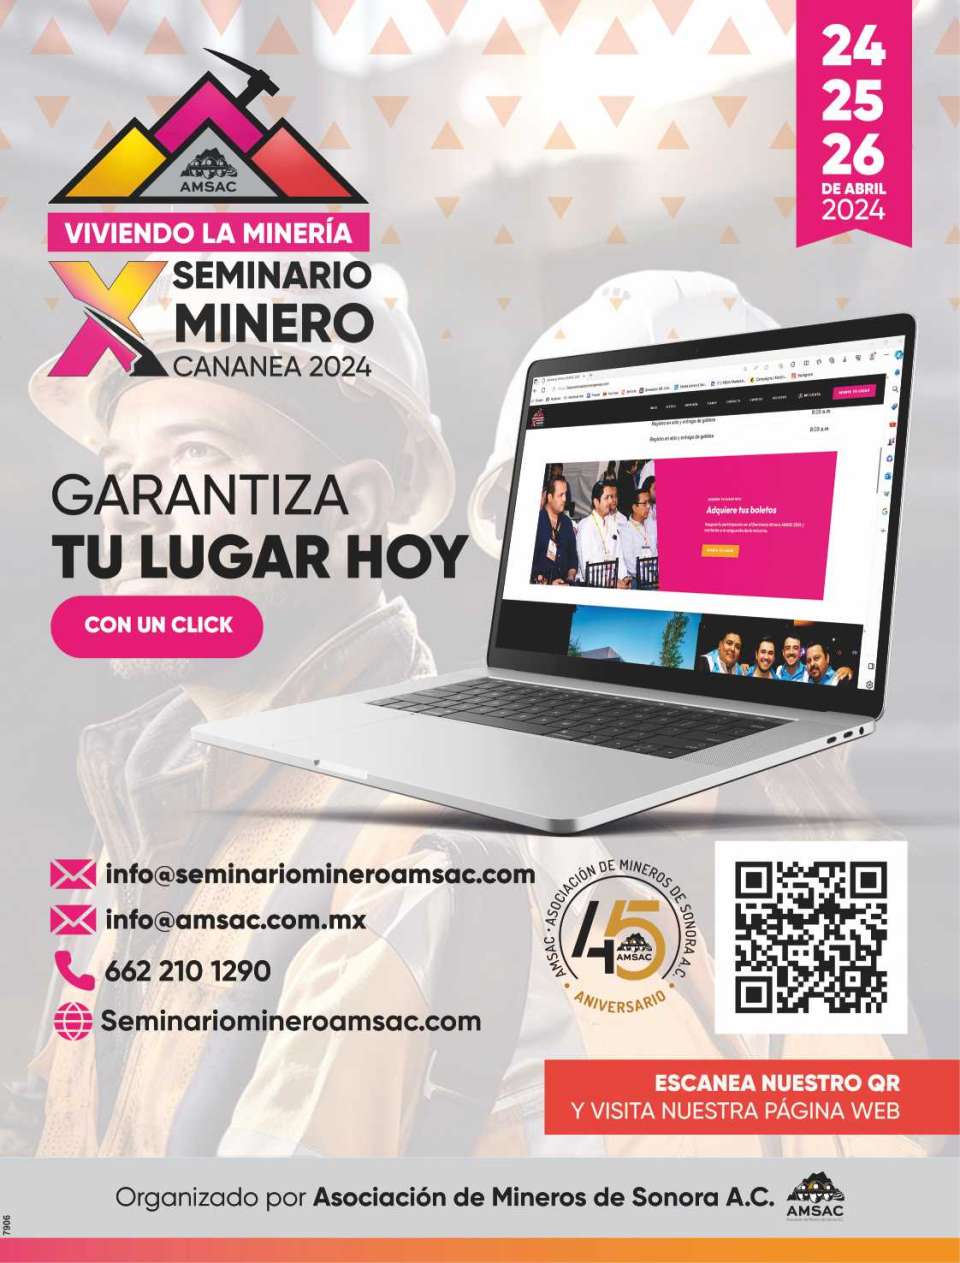 10th Mining Seminar in CANANEA, Sonora, at Parque Tamosura, from April 24-26, 2024.